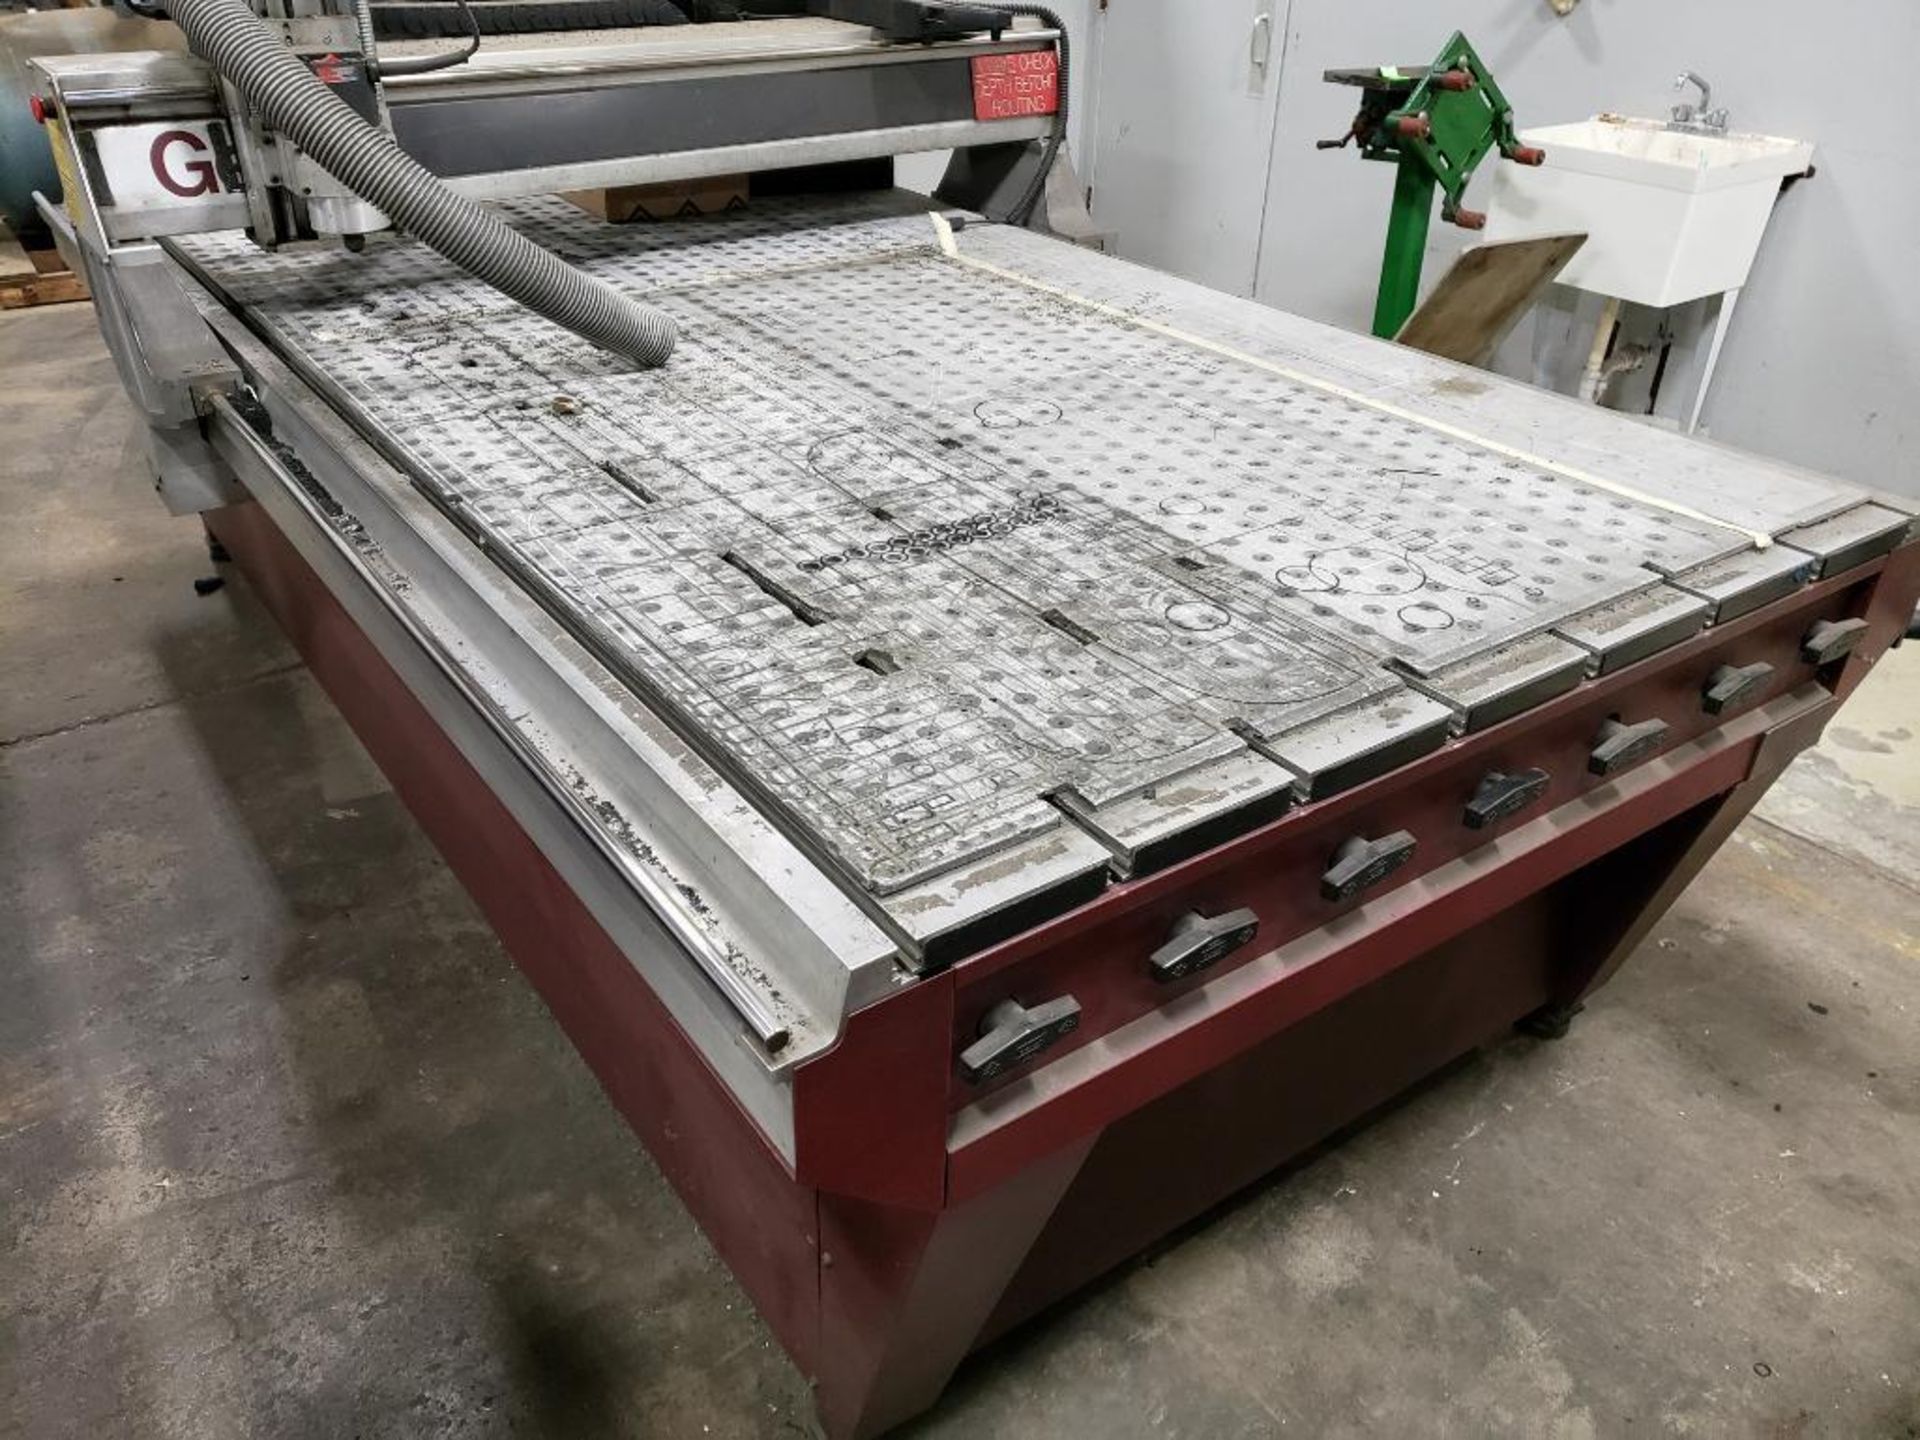 (Parts/Repairable) Gerber Sabre Model 408 CNC router. 54in x 121in table. 208-240v single phase. - Image 3 of 27